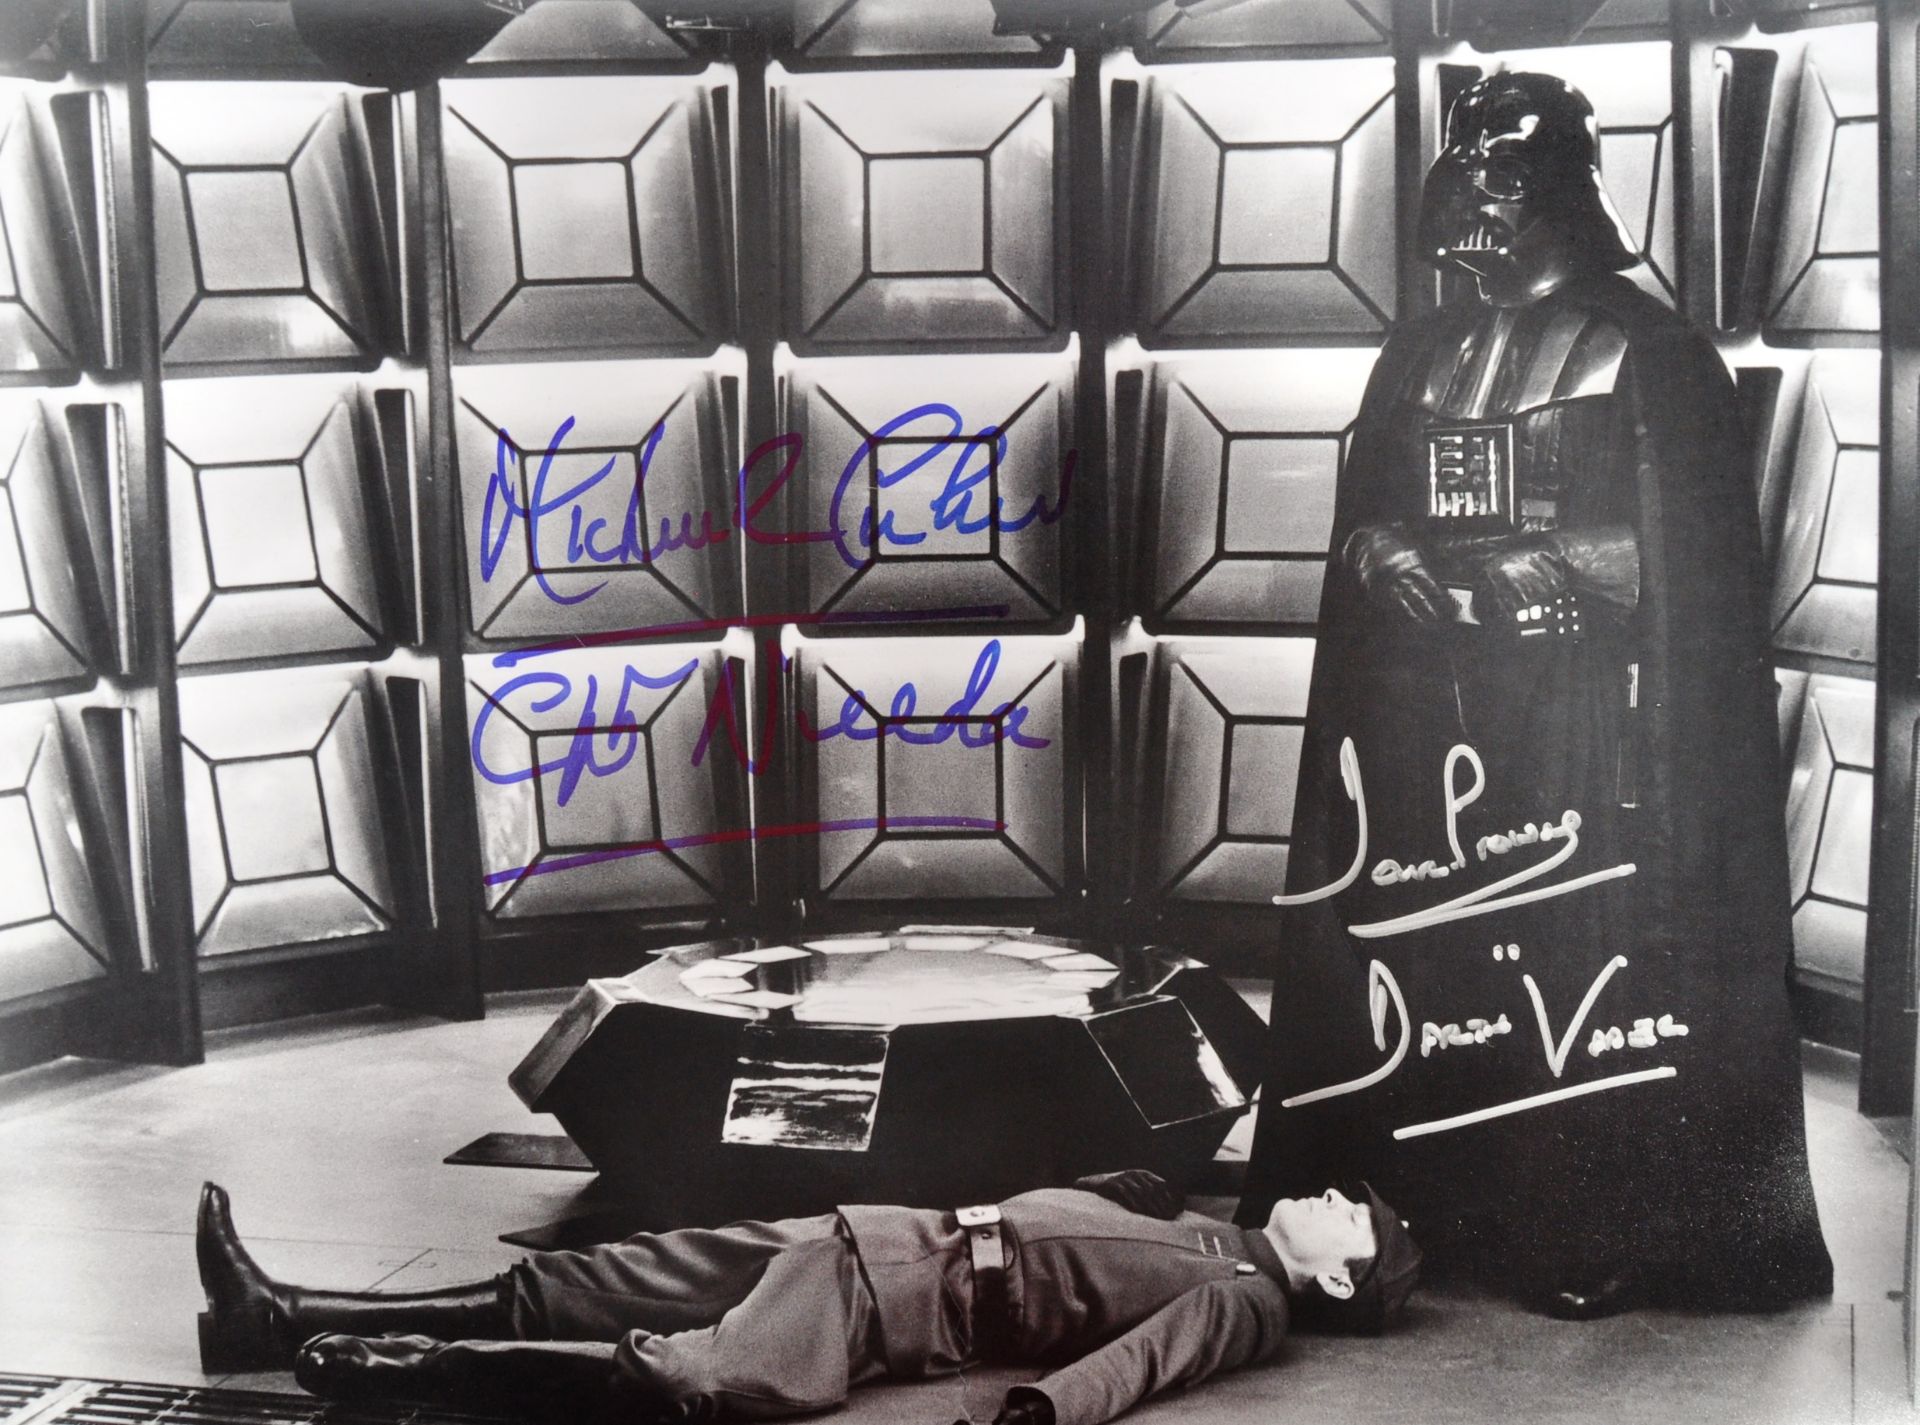 STAR WARS - DAVE PROWSE & MICHAEL CULVER SIGNED 16X12" PHOTO